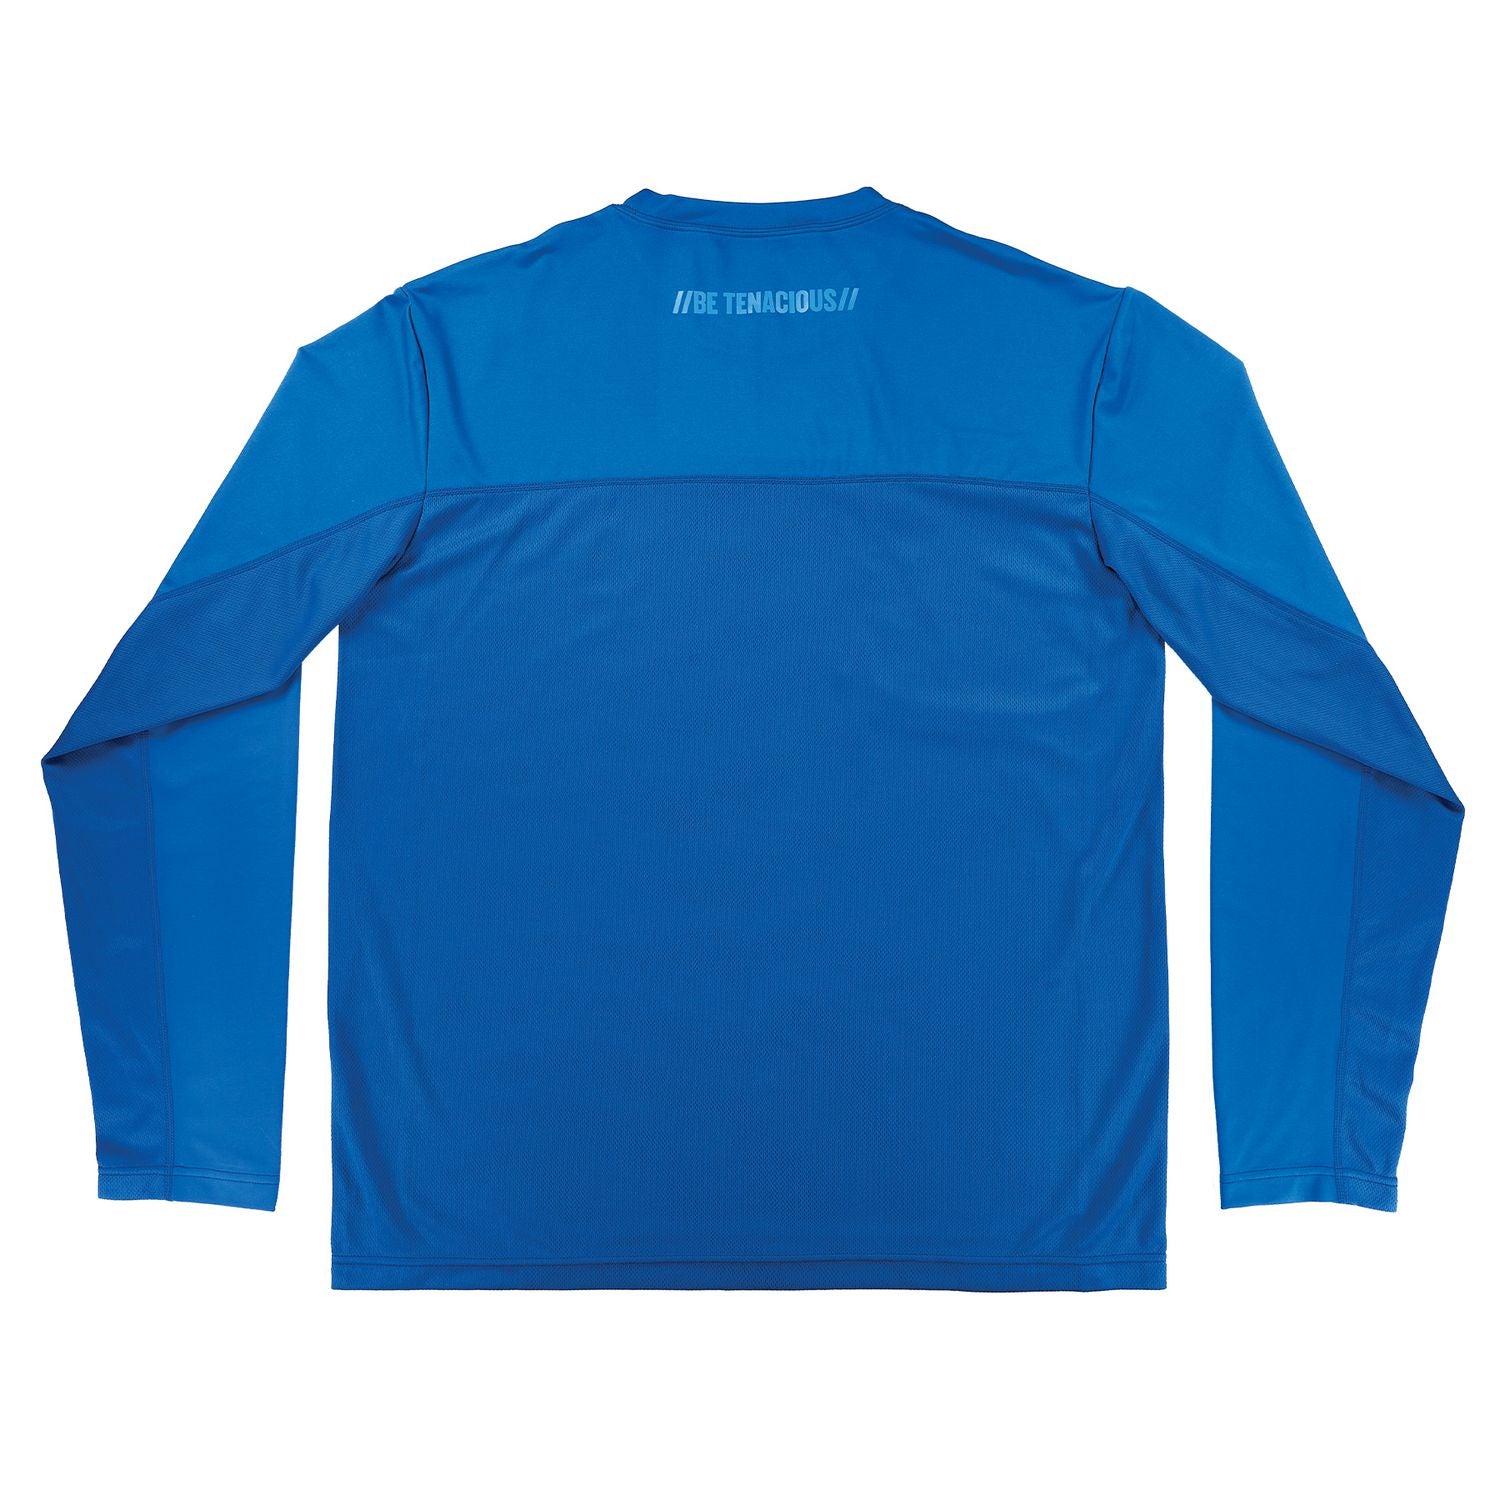 chill-its-6689-cooling-long-sleeve-sun-shirt-with-uv-protection-medium-blue-ships-in-1-3-business-days_ego12153 - 2